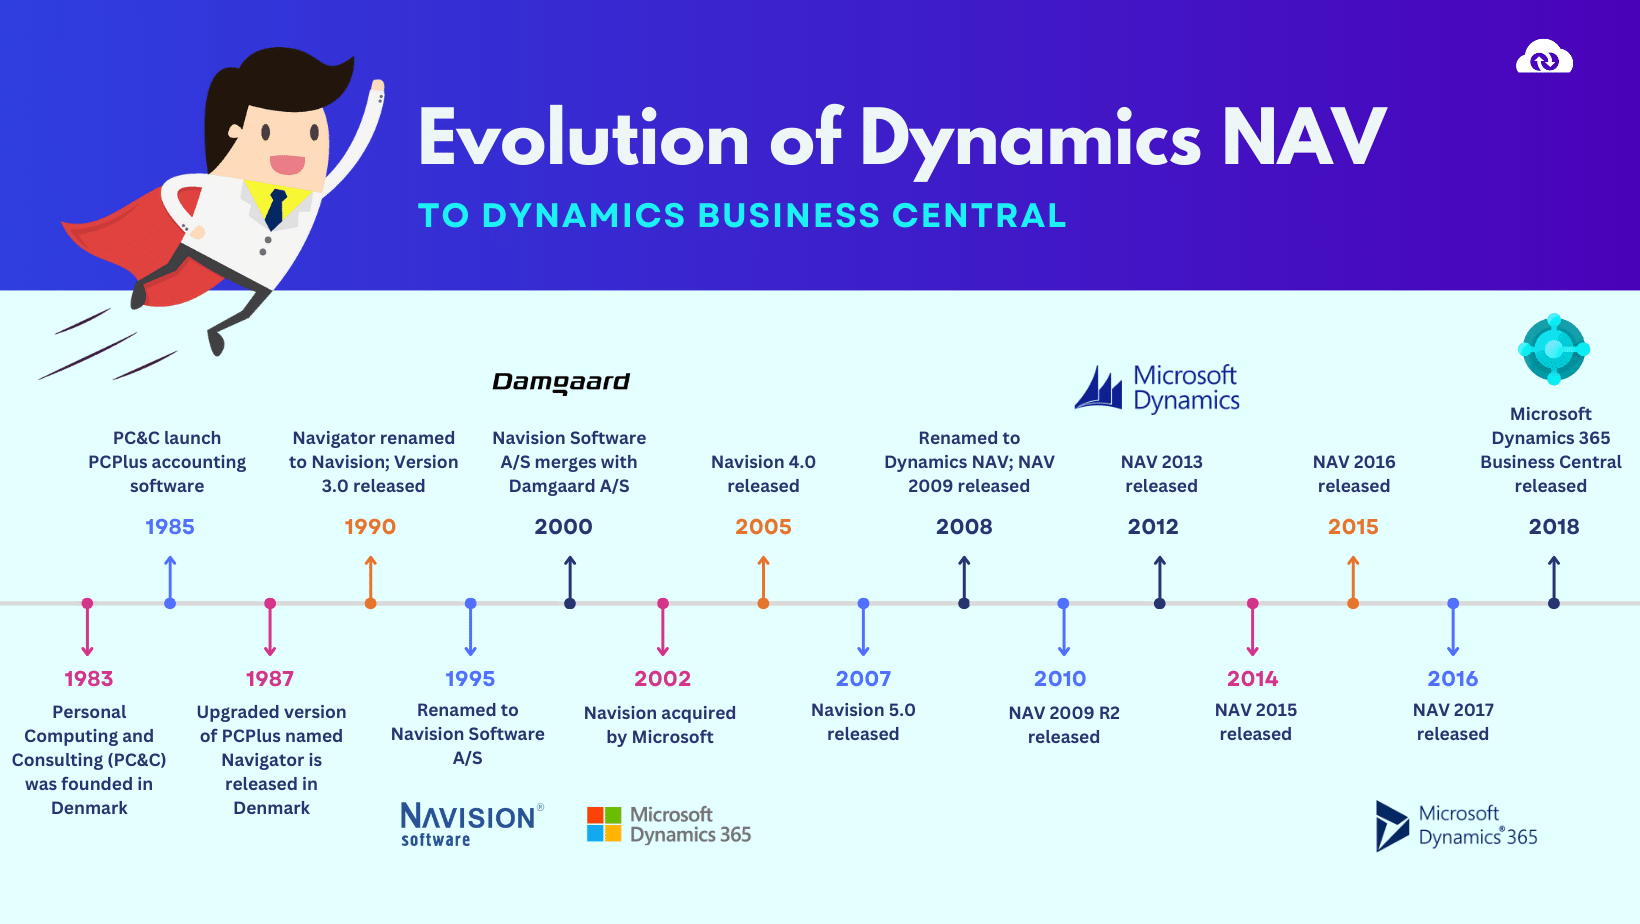 evolution-of-dynamics-NAV-to-business-central